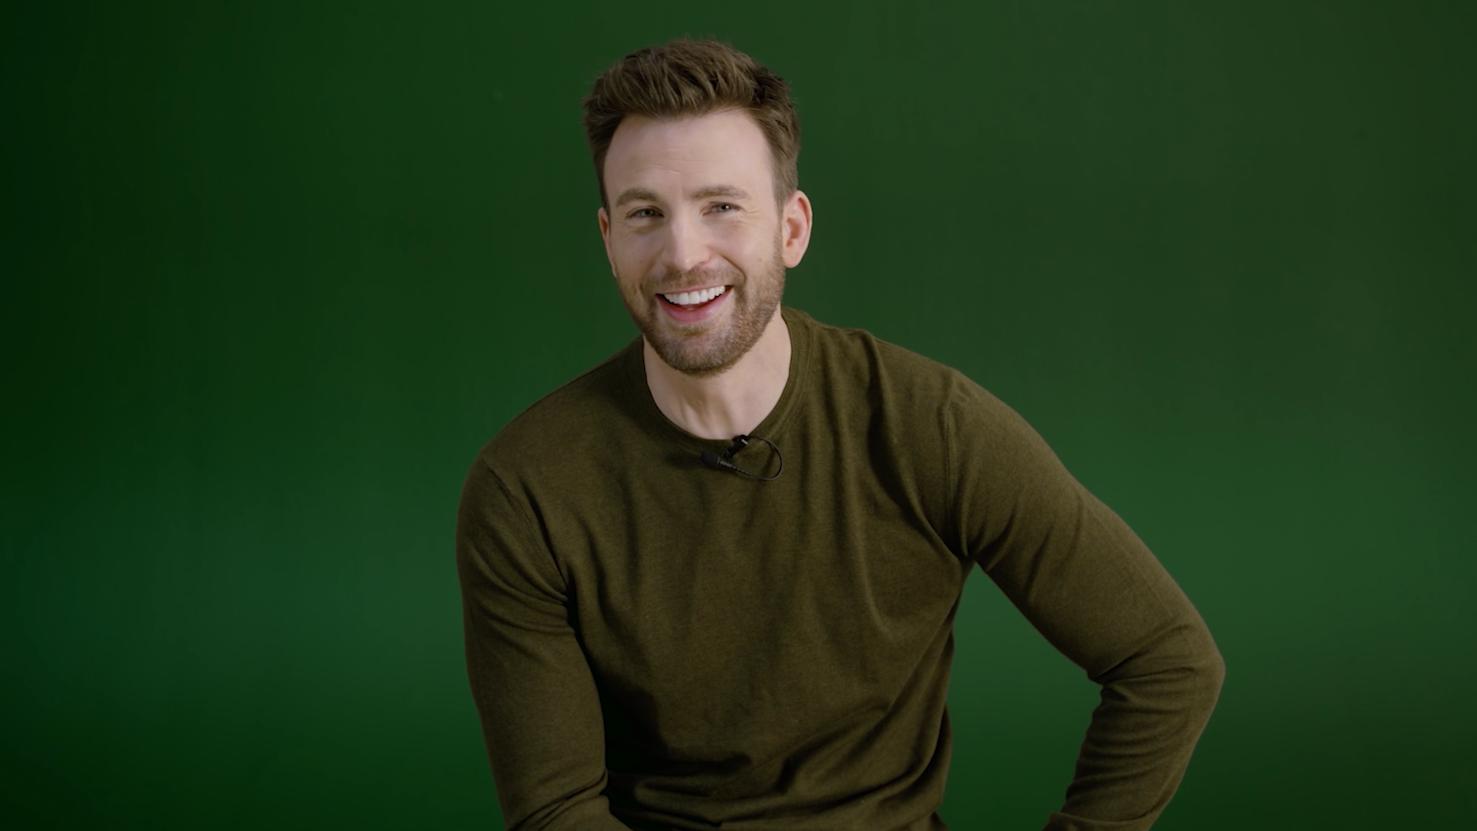 Chris Evans: “I can’t wait to visit the Philippines!”